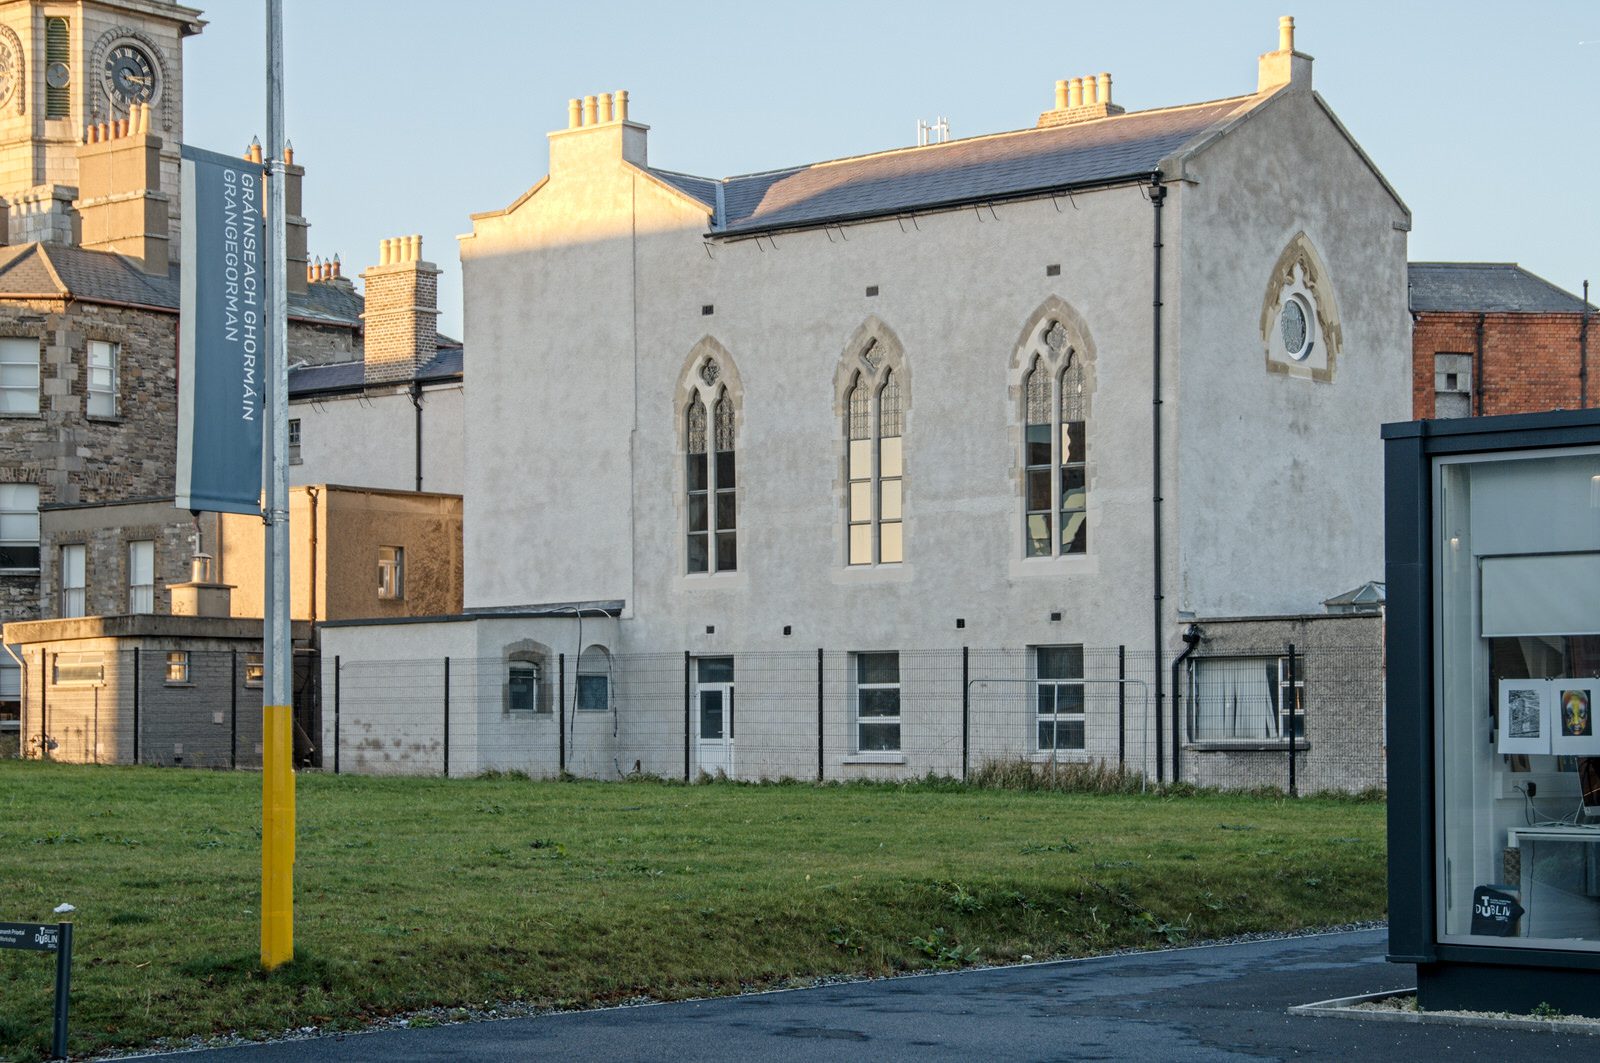 A SUNNY BUT VERY COLD DAY AT THE GRANGEGORMAN UNIVERSITY CAMPUS 048